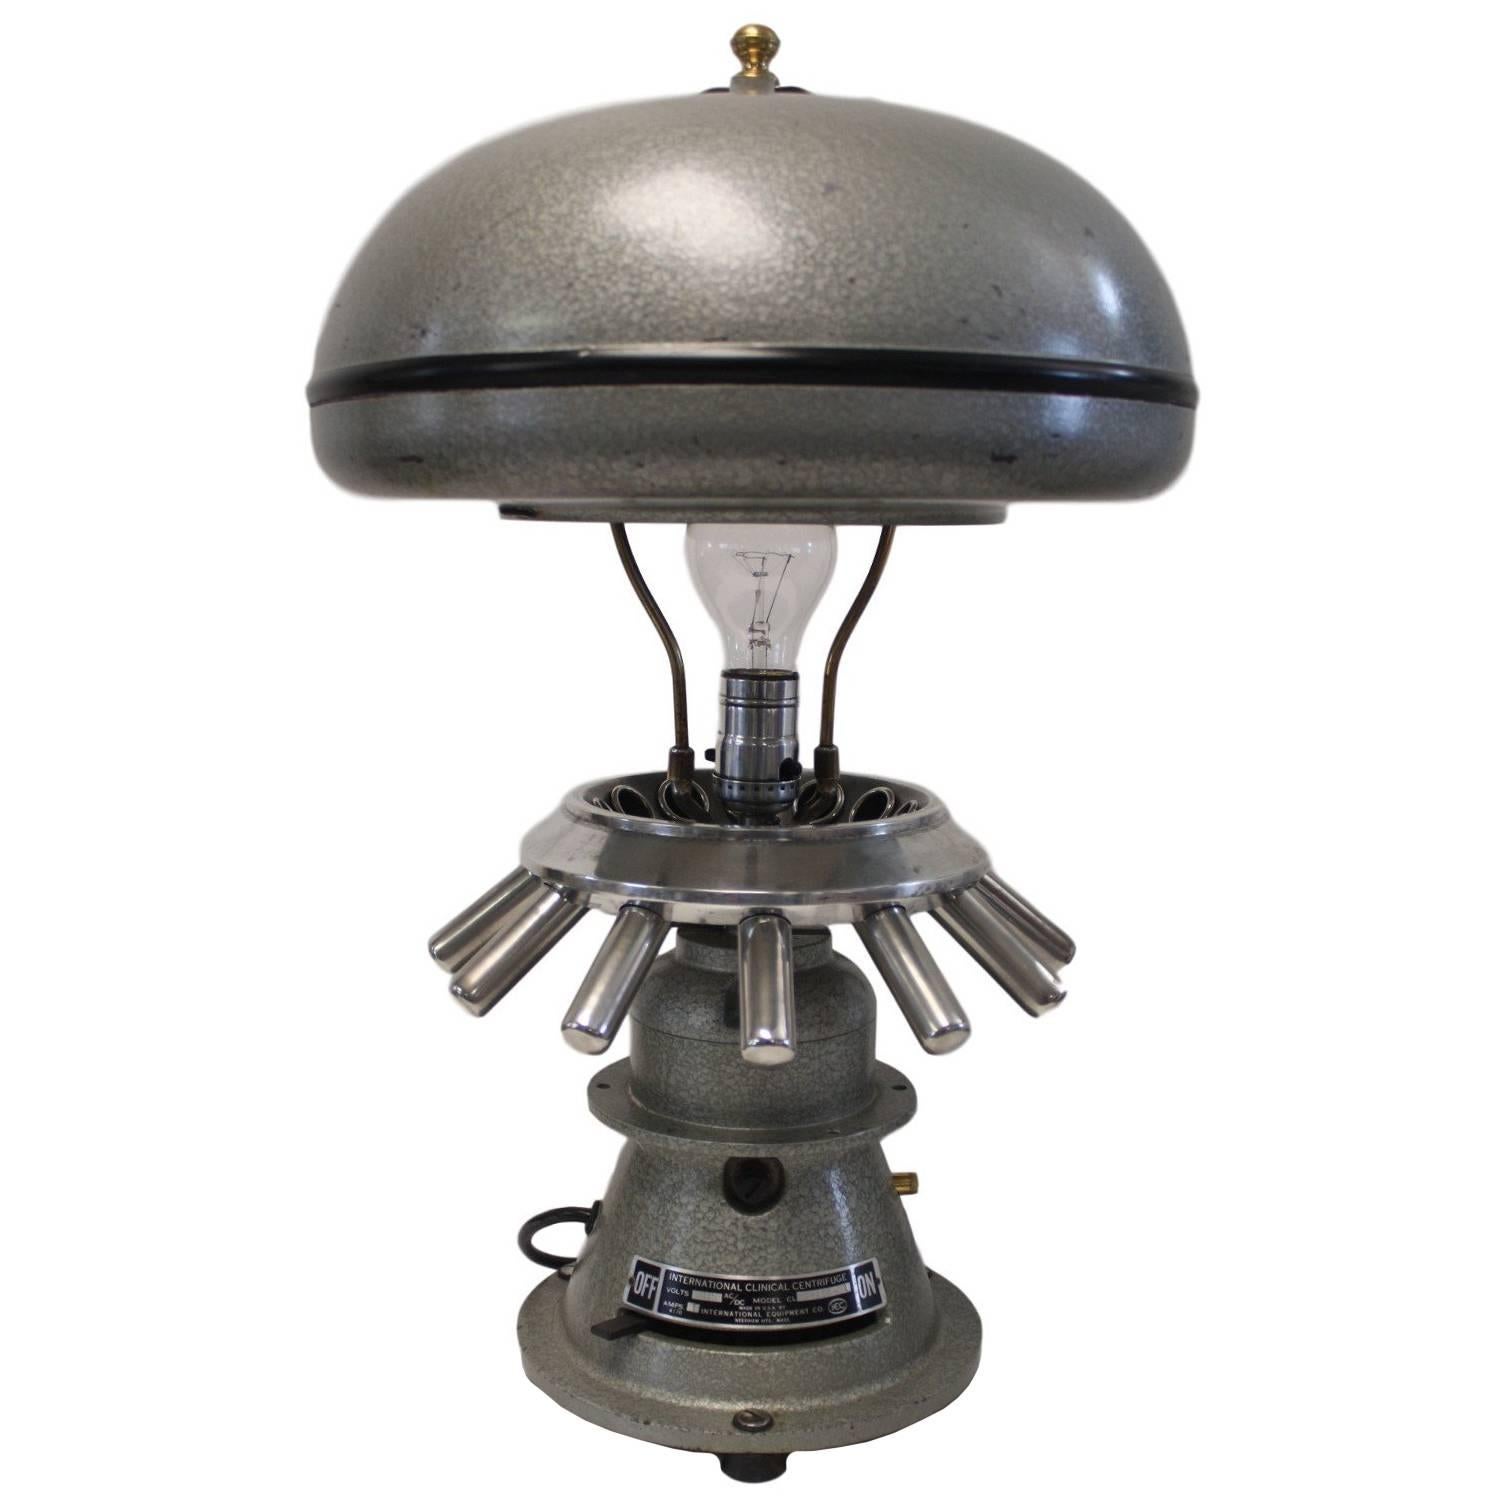 Re-Purposed Vintage 1950s Industrial Scientific Centrifuge Table Lamp Light